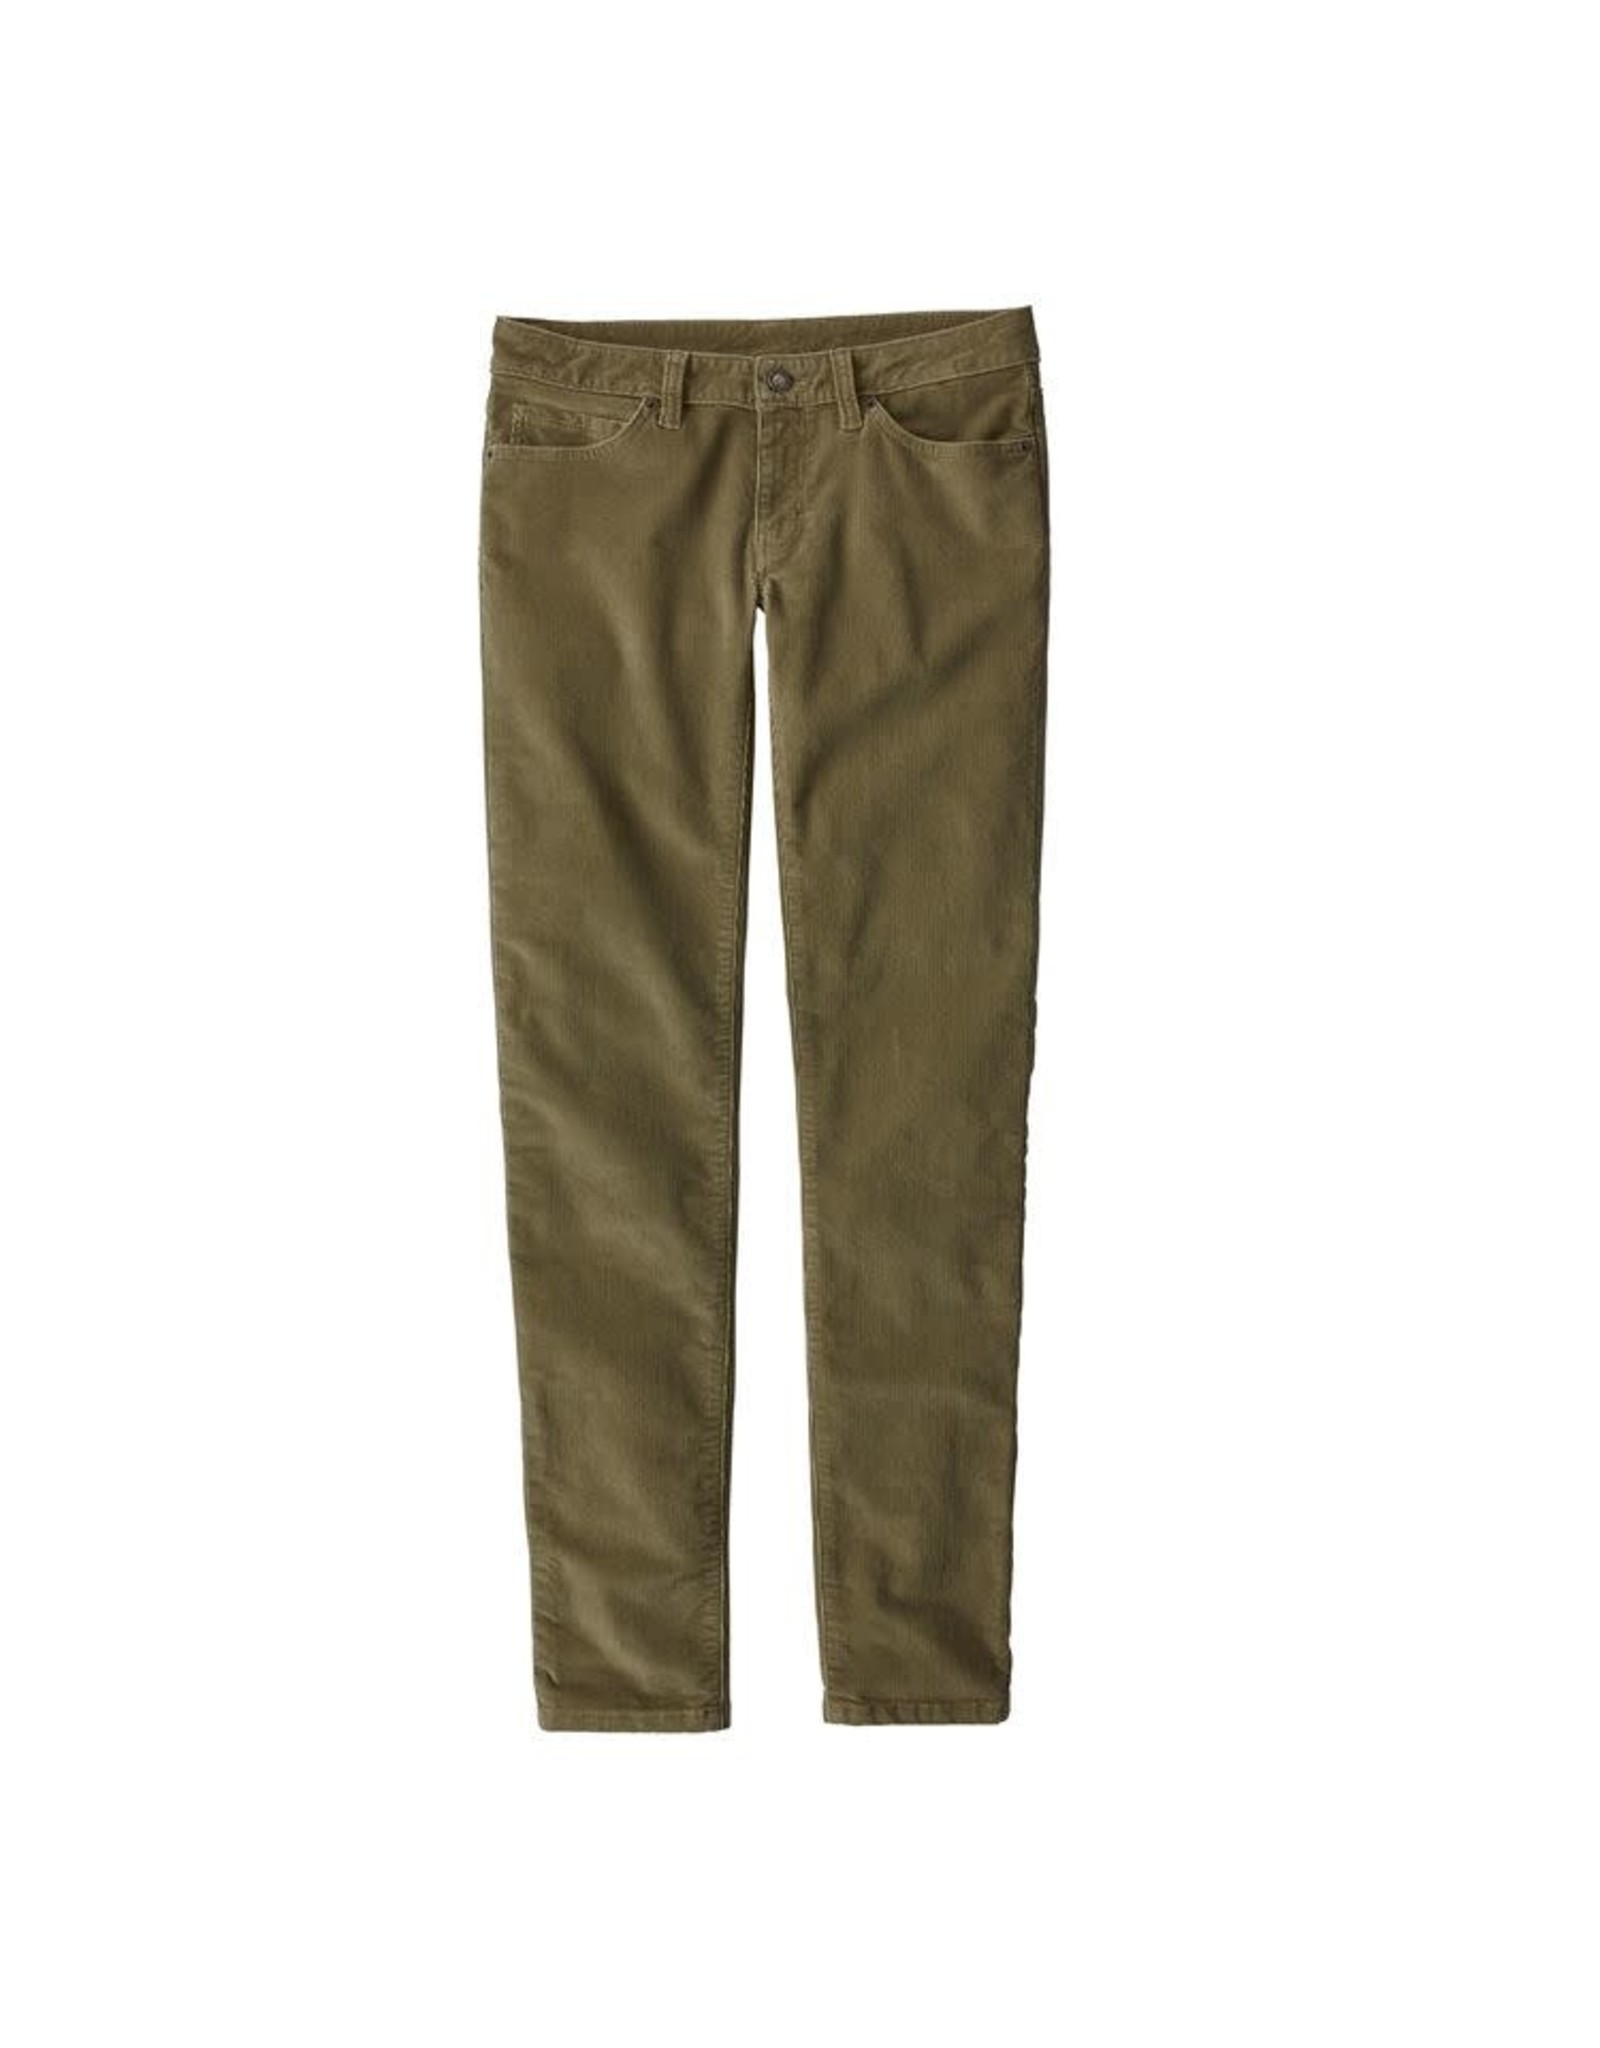 Patagonia W's Fitted Corduroy Pants